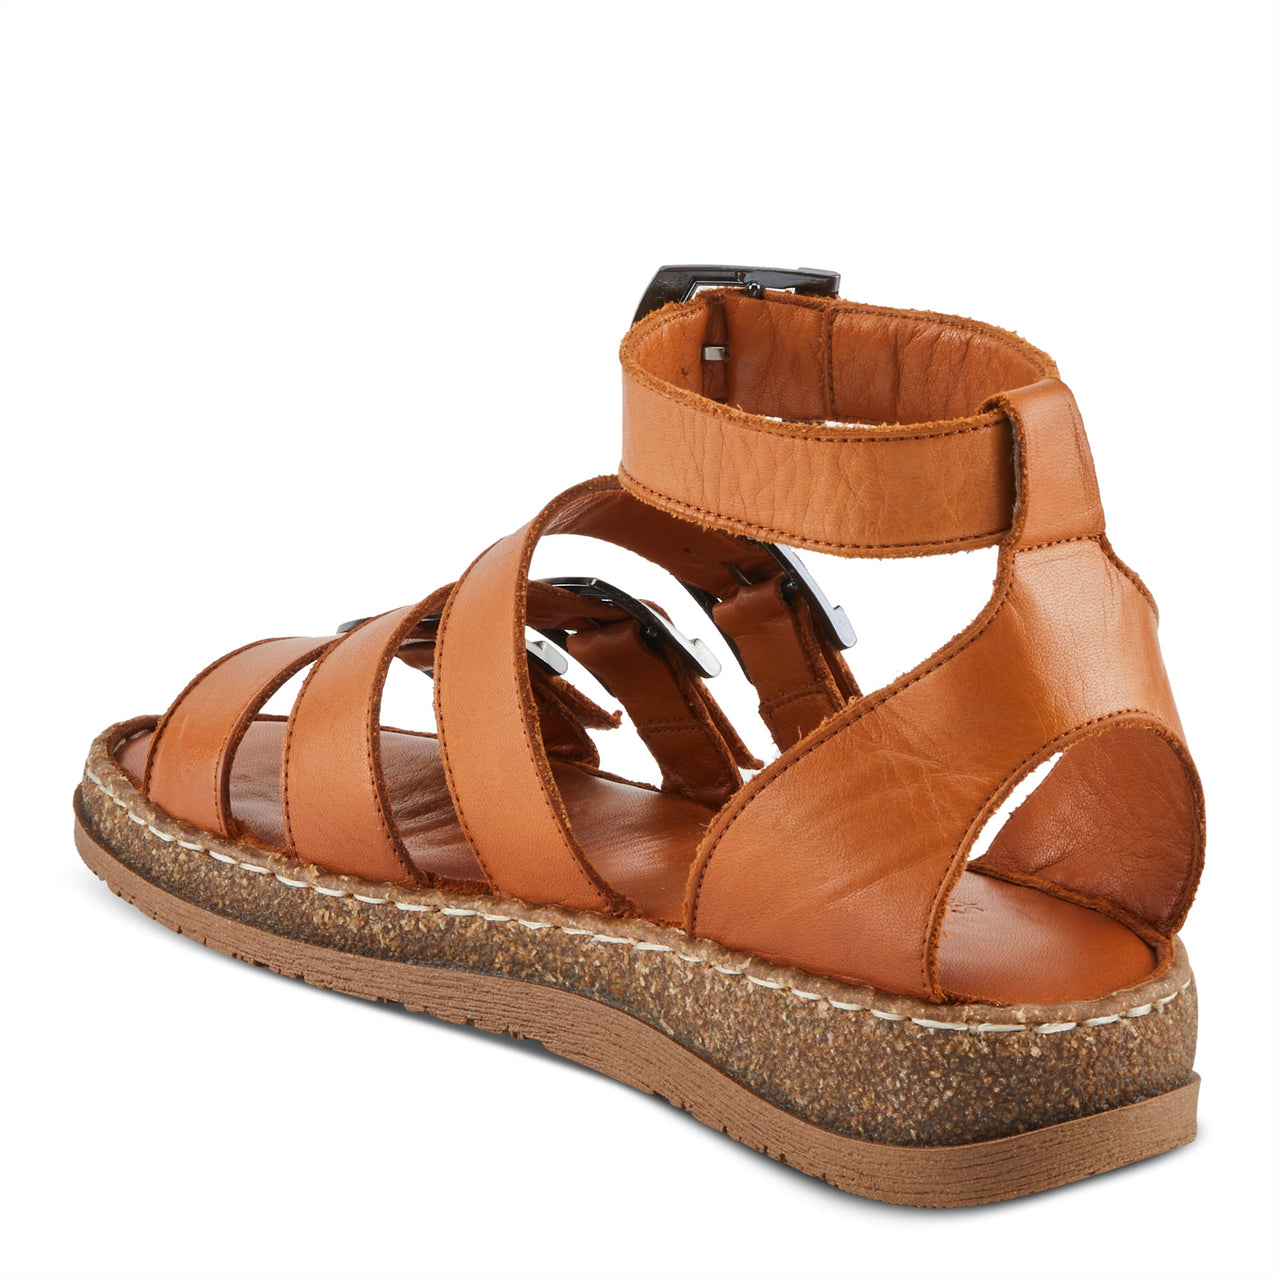 Beautiful and stylish Spring Step Alexcia Sandals in black leather with adjustable ankle strap and cushioned footbed perfect for all-day wear